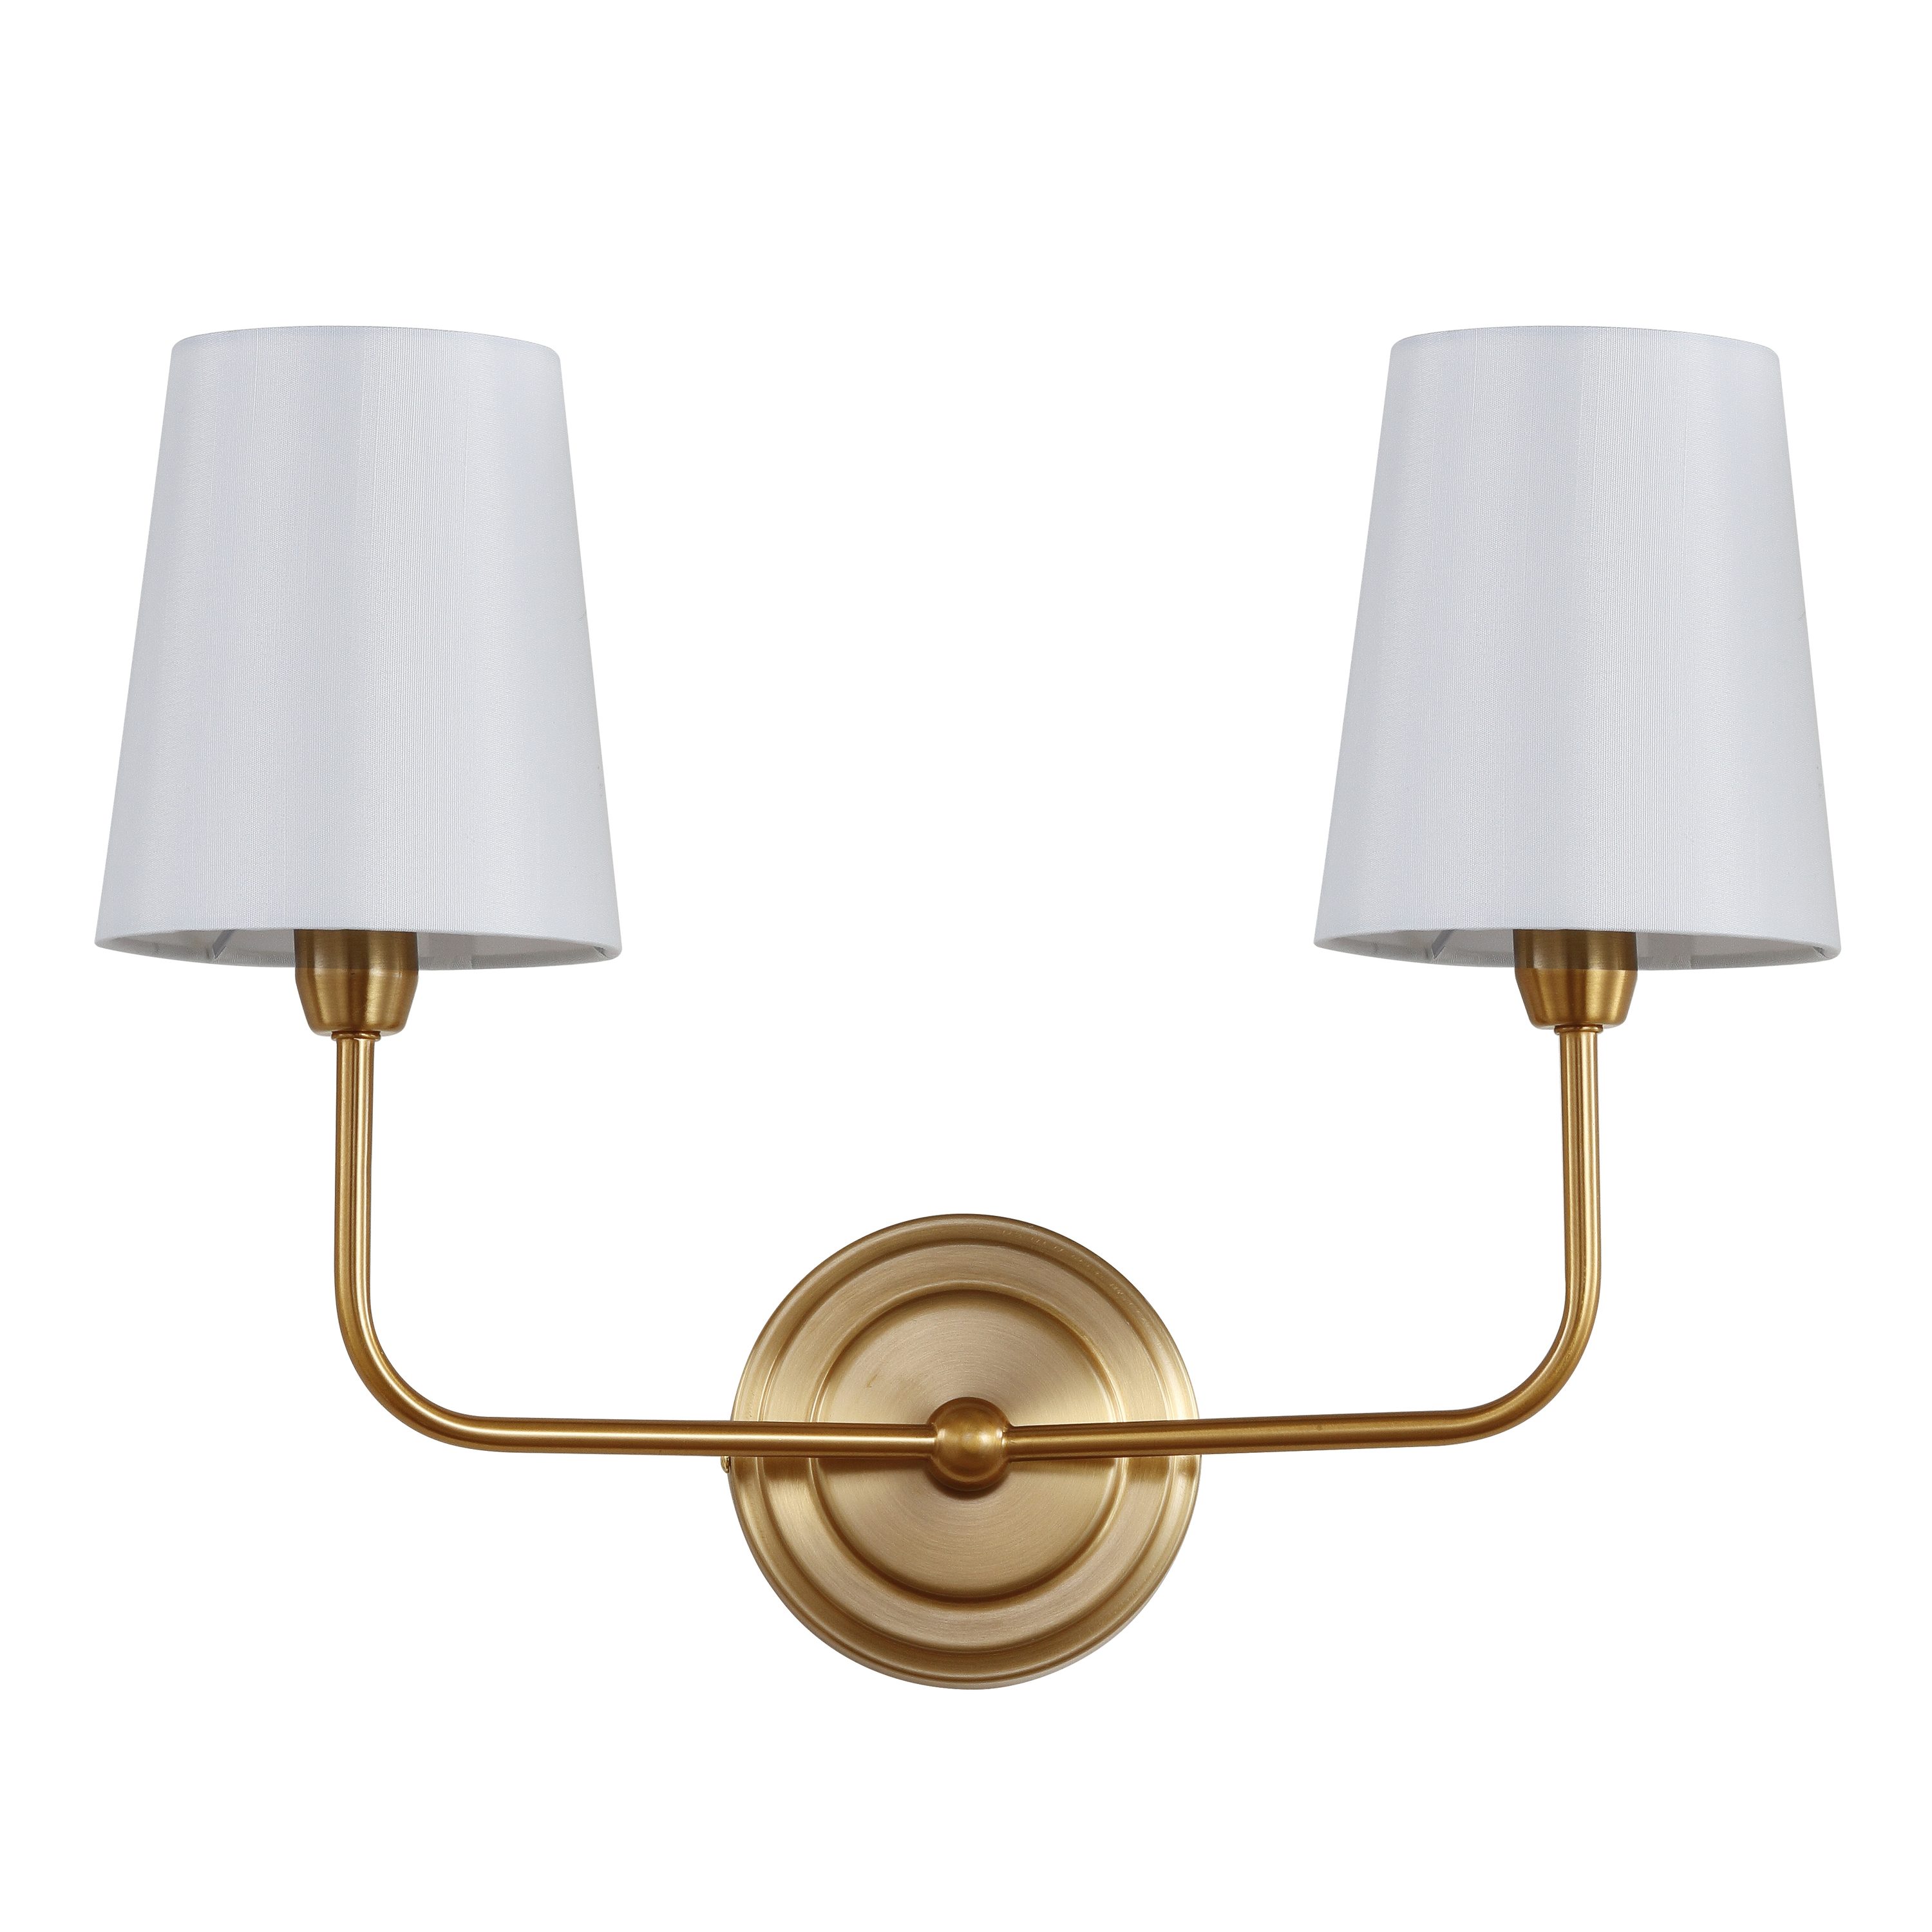 Safavieh Jaxson 17 5 In W 2 Light Brass Gold French Country Cottage Wall Sconce The Sconces Department At Com - 2 Light Wall Sconce With Shade